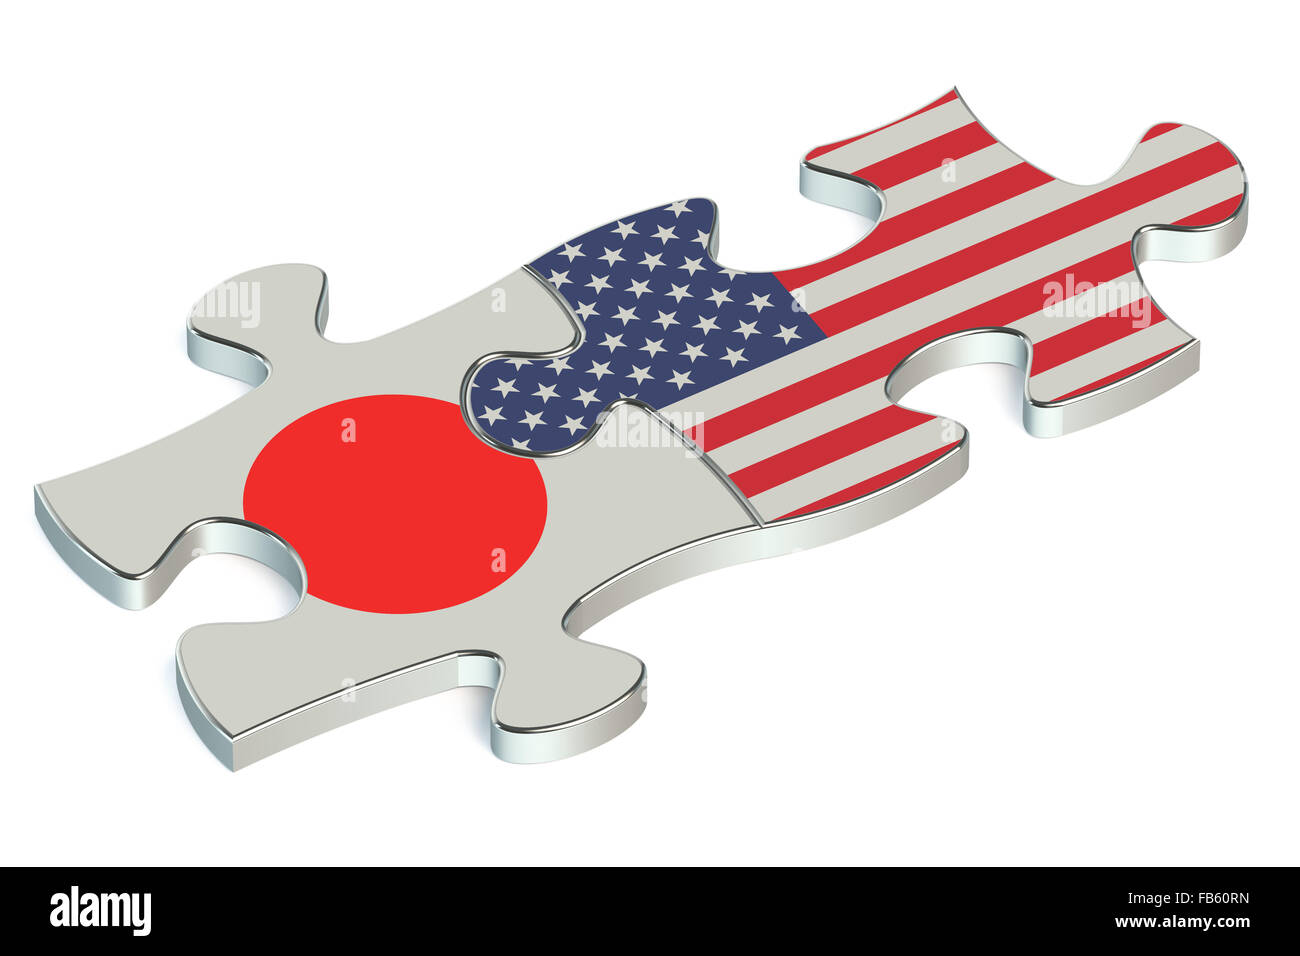 USA and Japan puzzles from flags Stock Photo